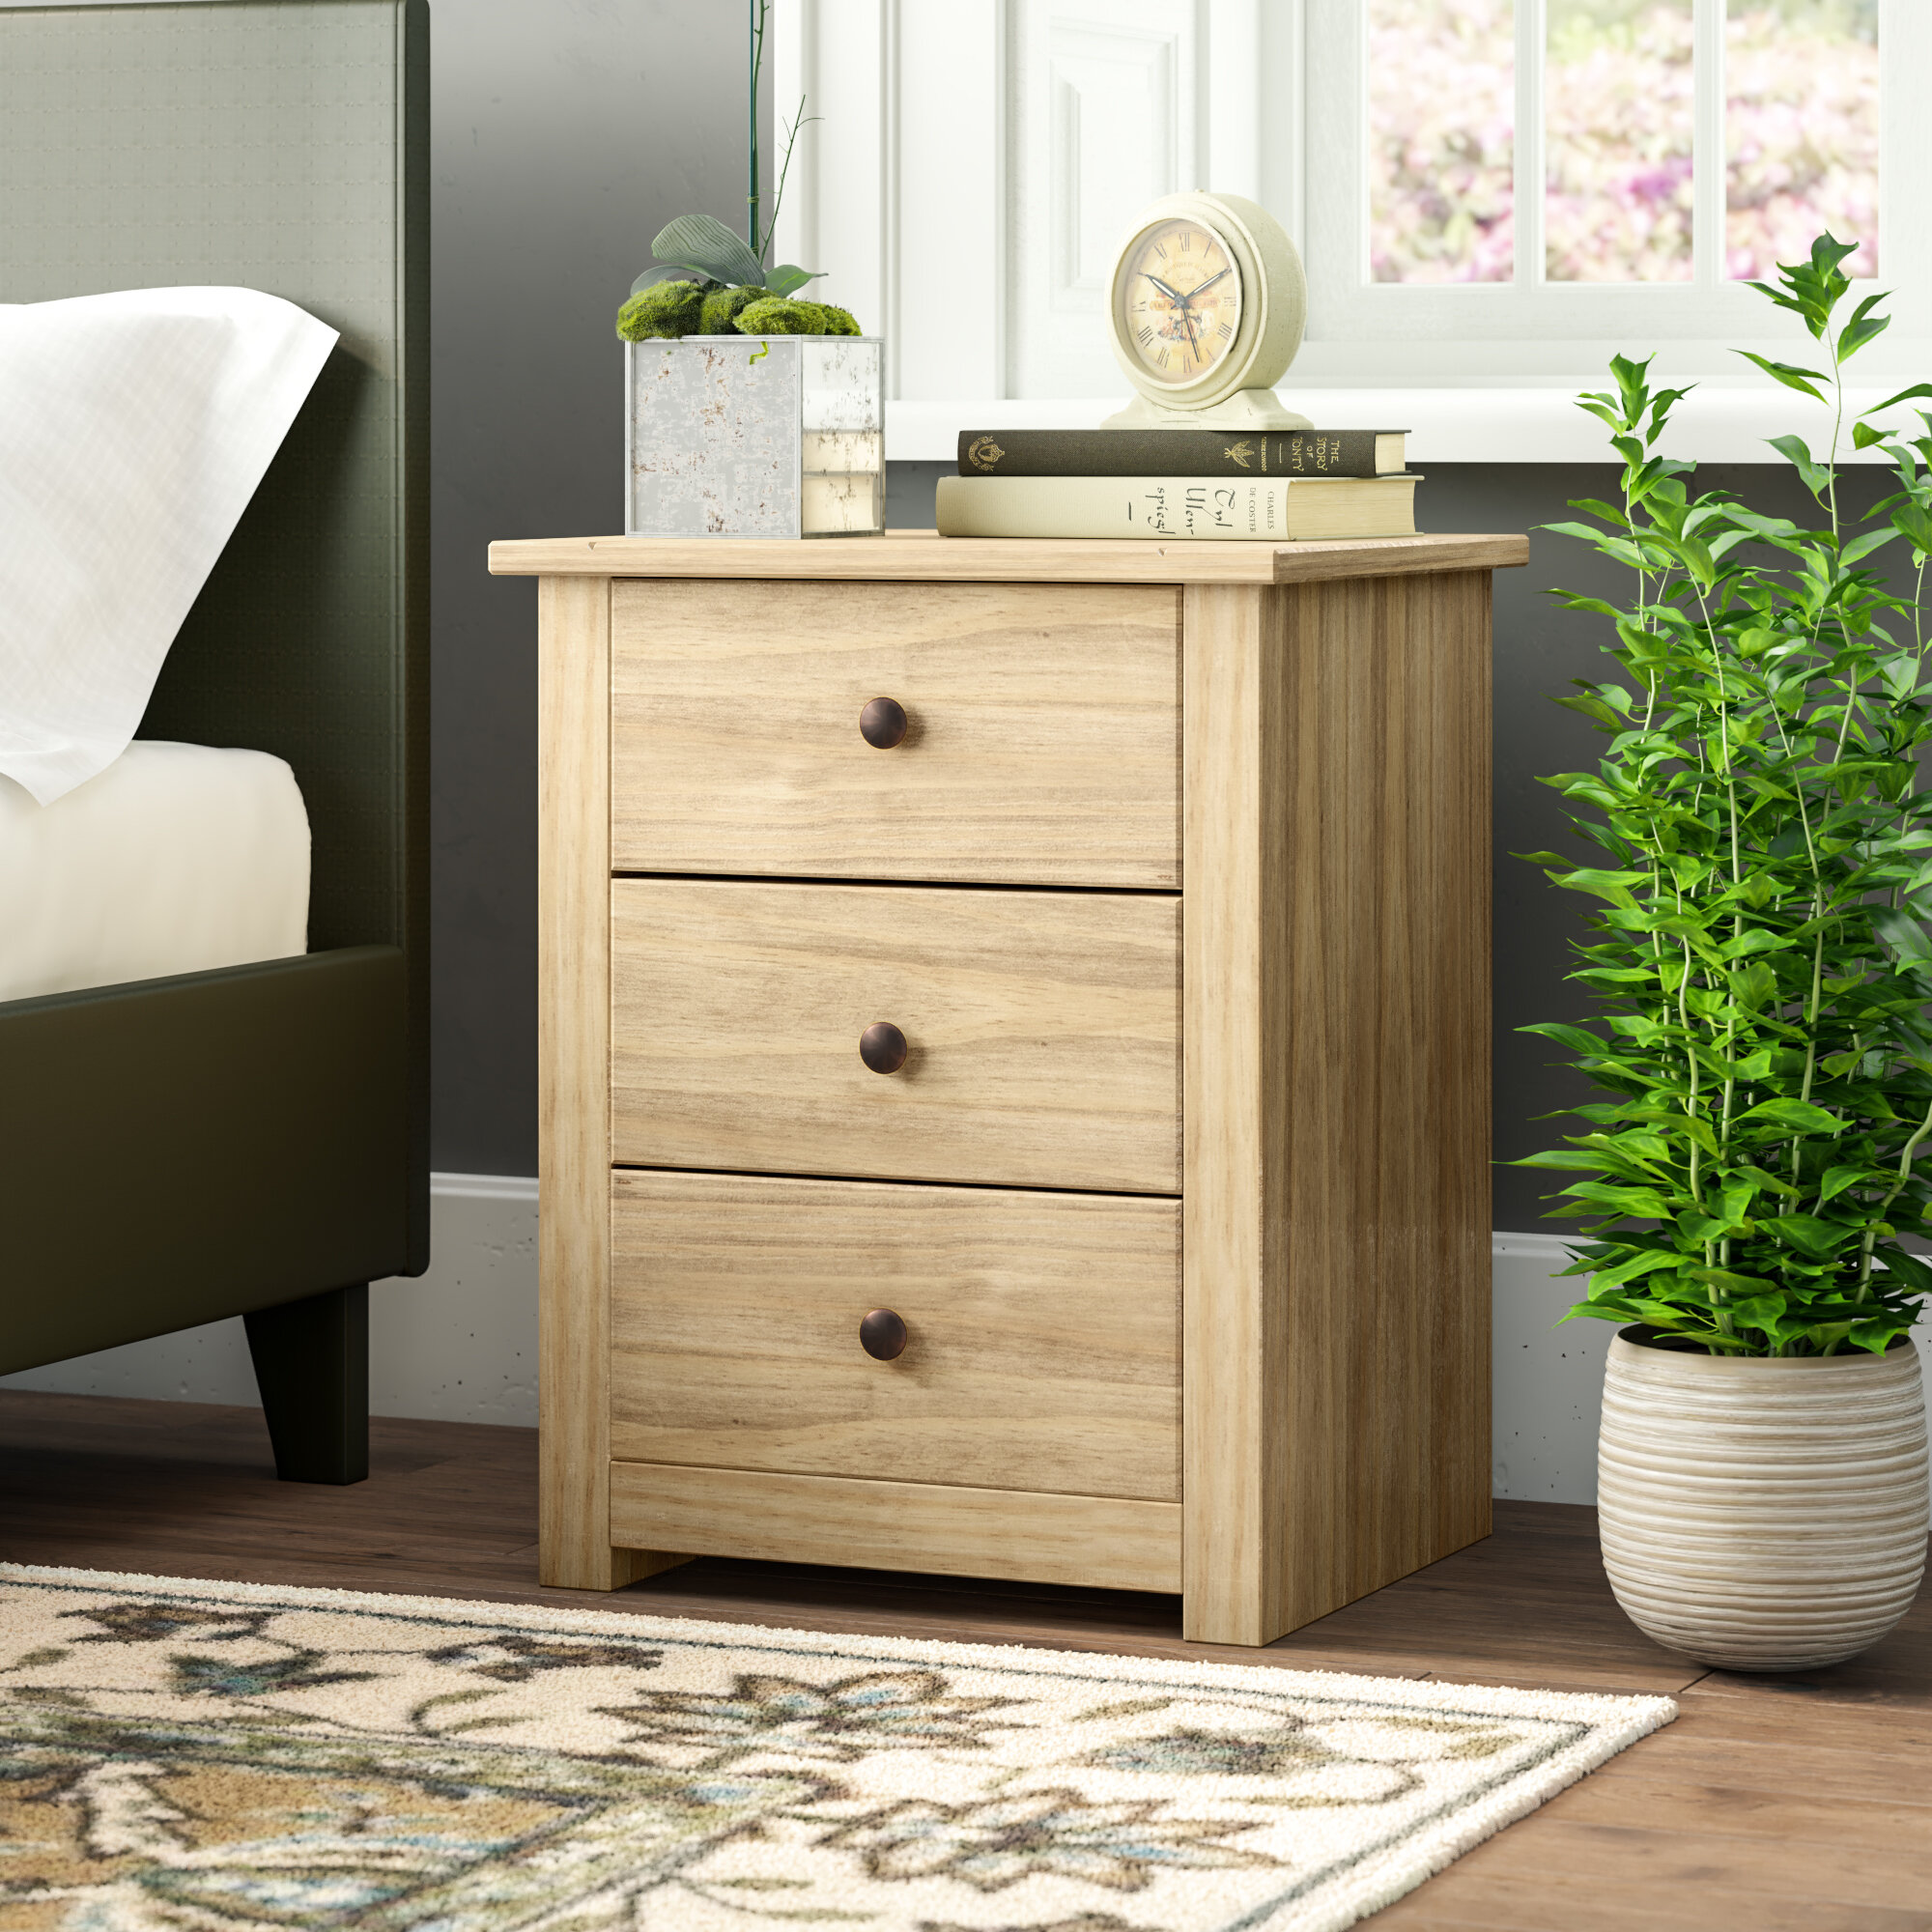 Natur Pur Weiss 3 Drawer Bedside Table Reviews Wayfaircouk